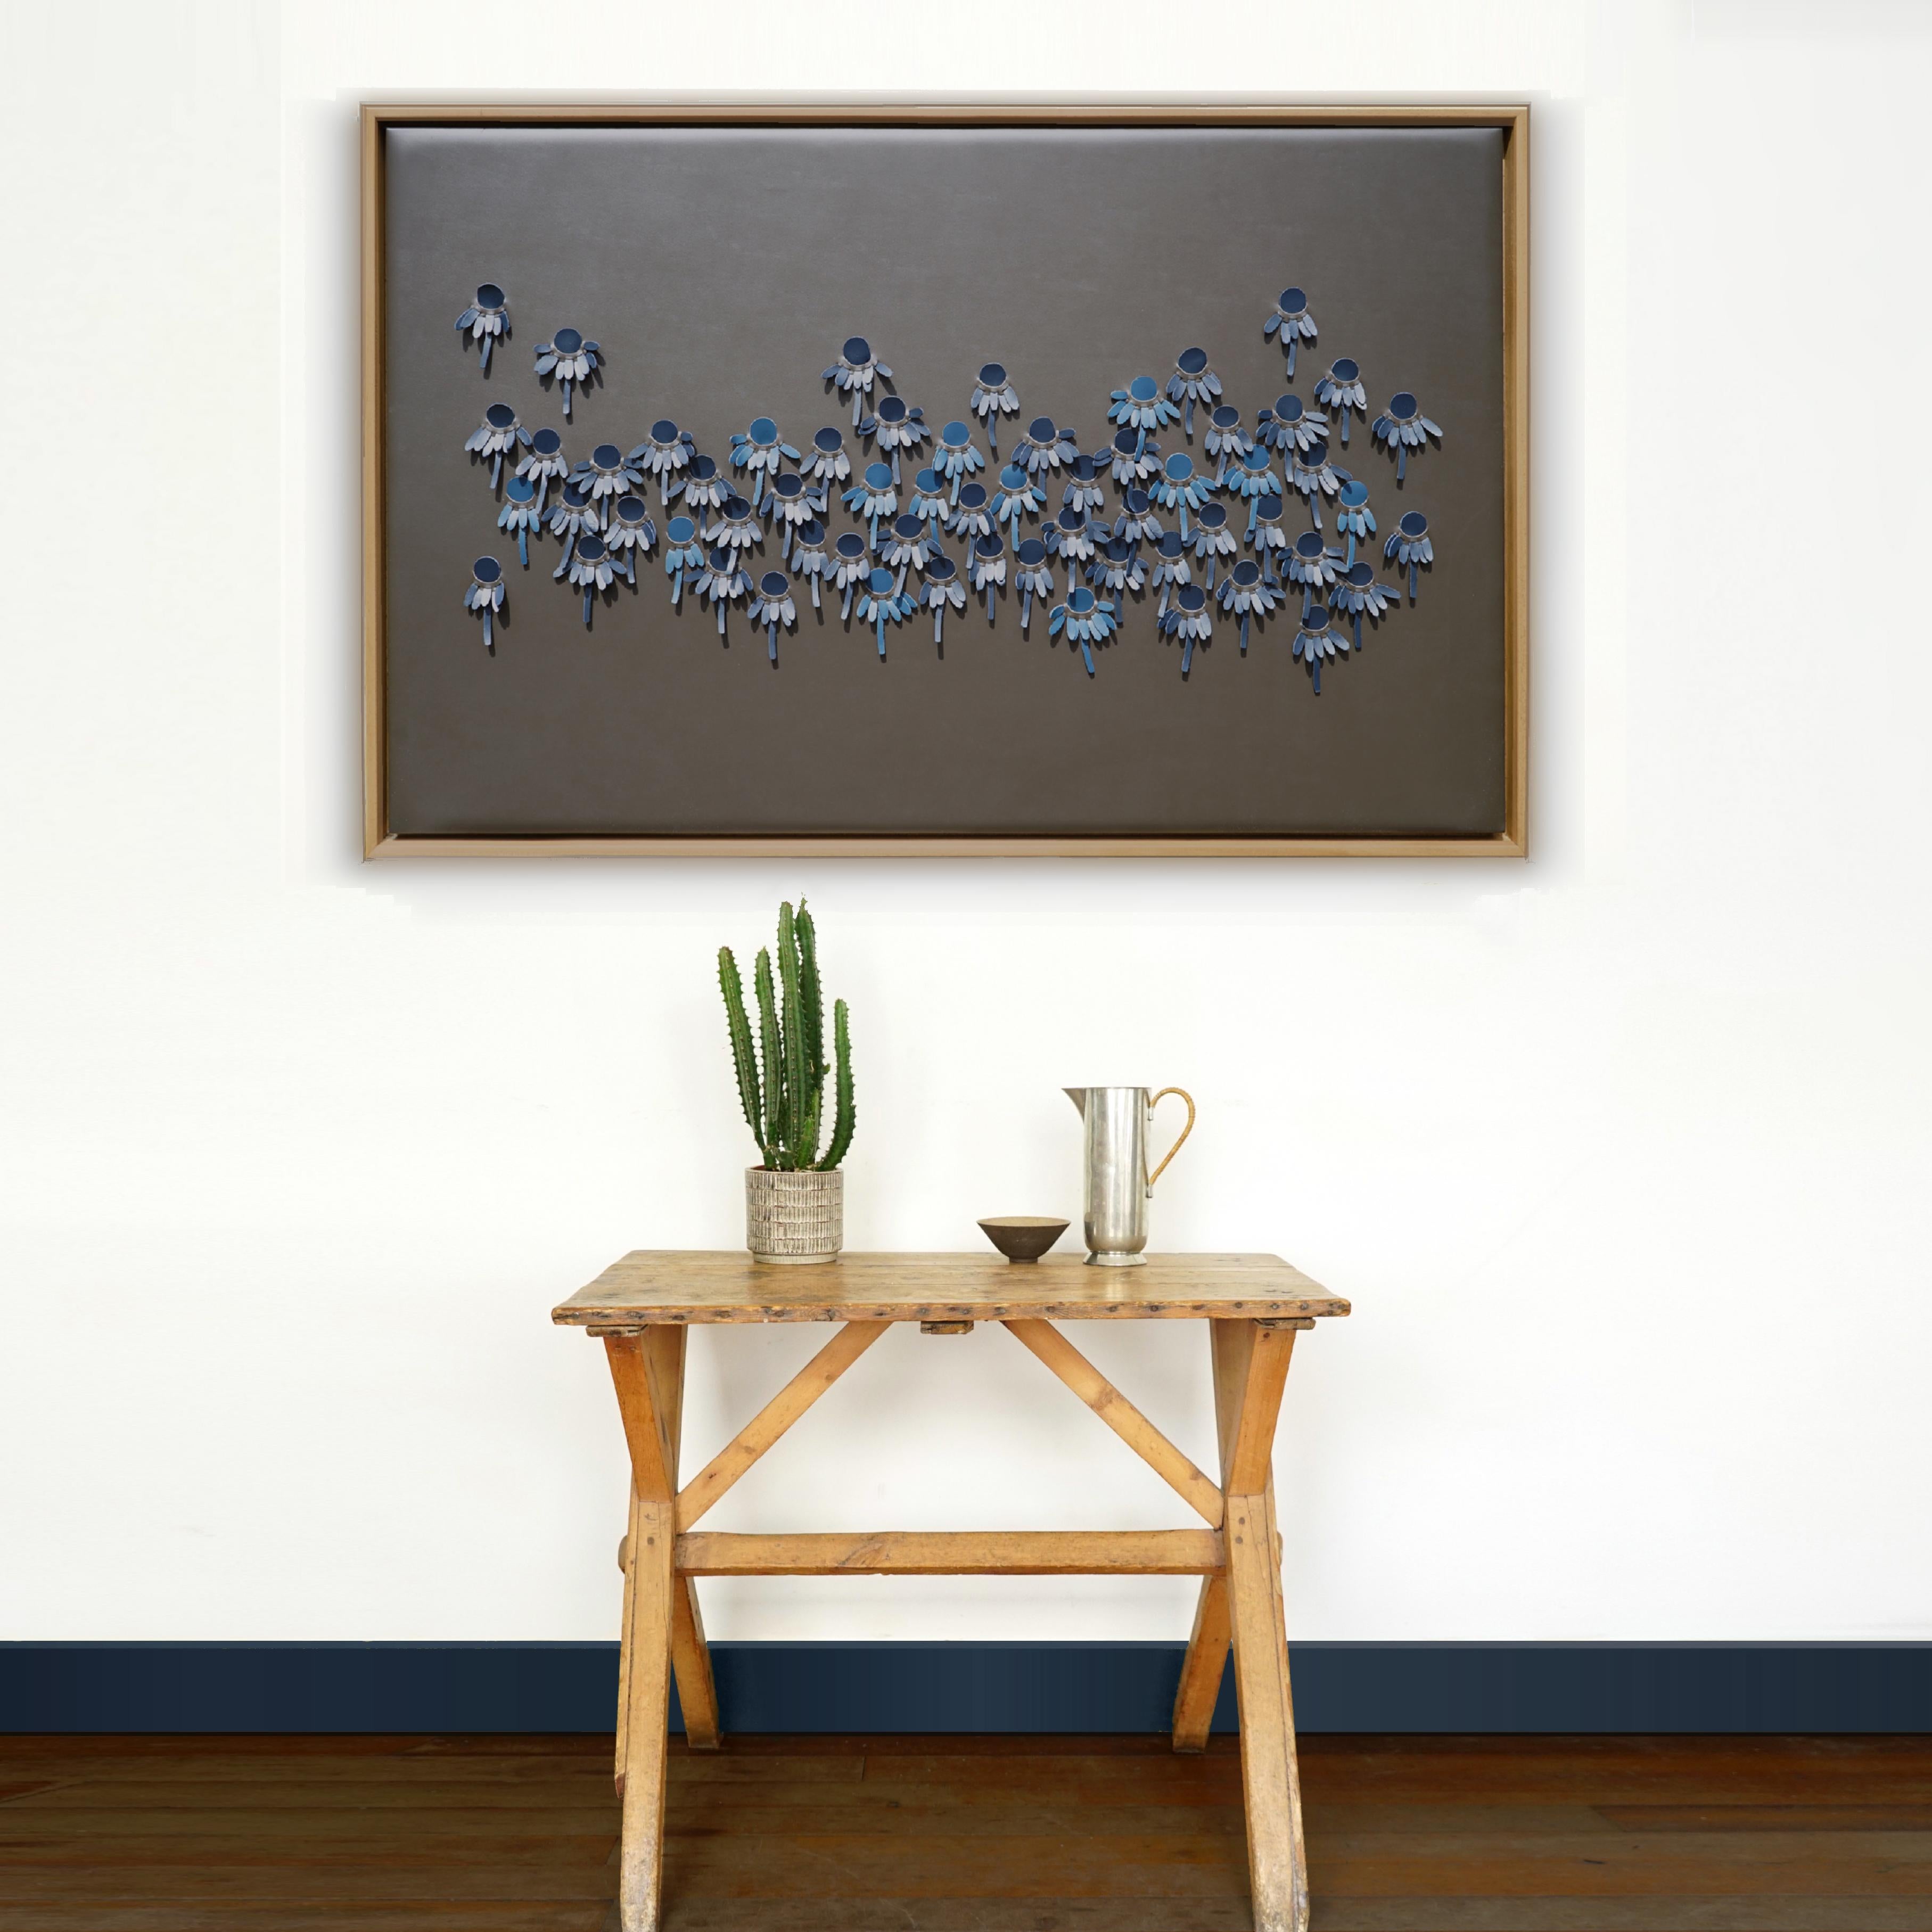 Coneflower:

A piece of 3D sculptural wall art designed and made from two layers of leather, one blue one pink, woven together by Louise Heighes.
Measurements are 31 x 49 inches or 79 x 124 cm

This piece of wall art is inspired by the slightly